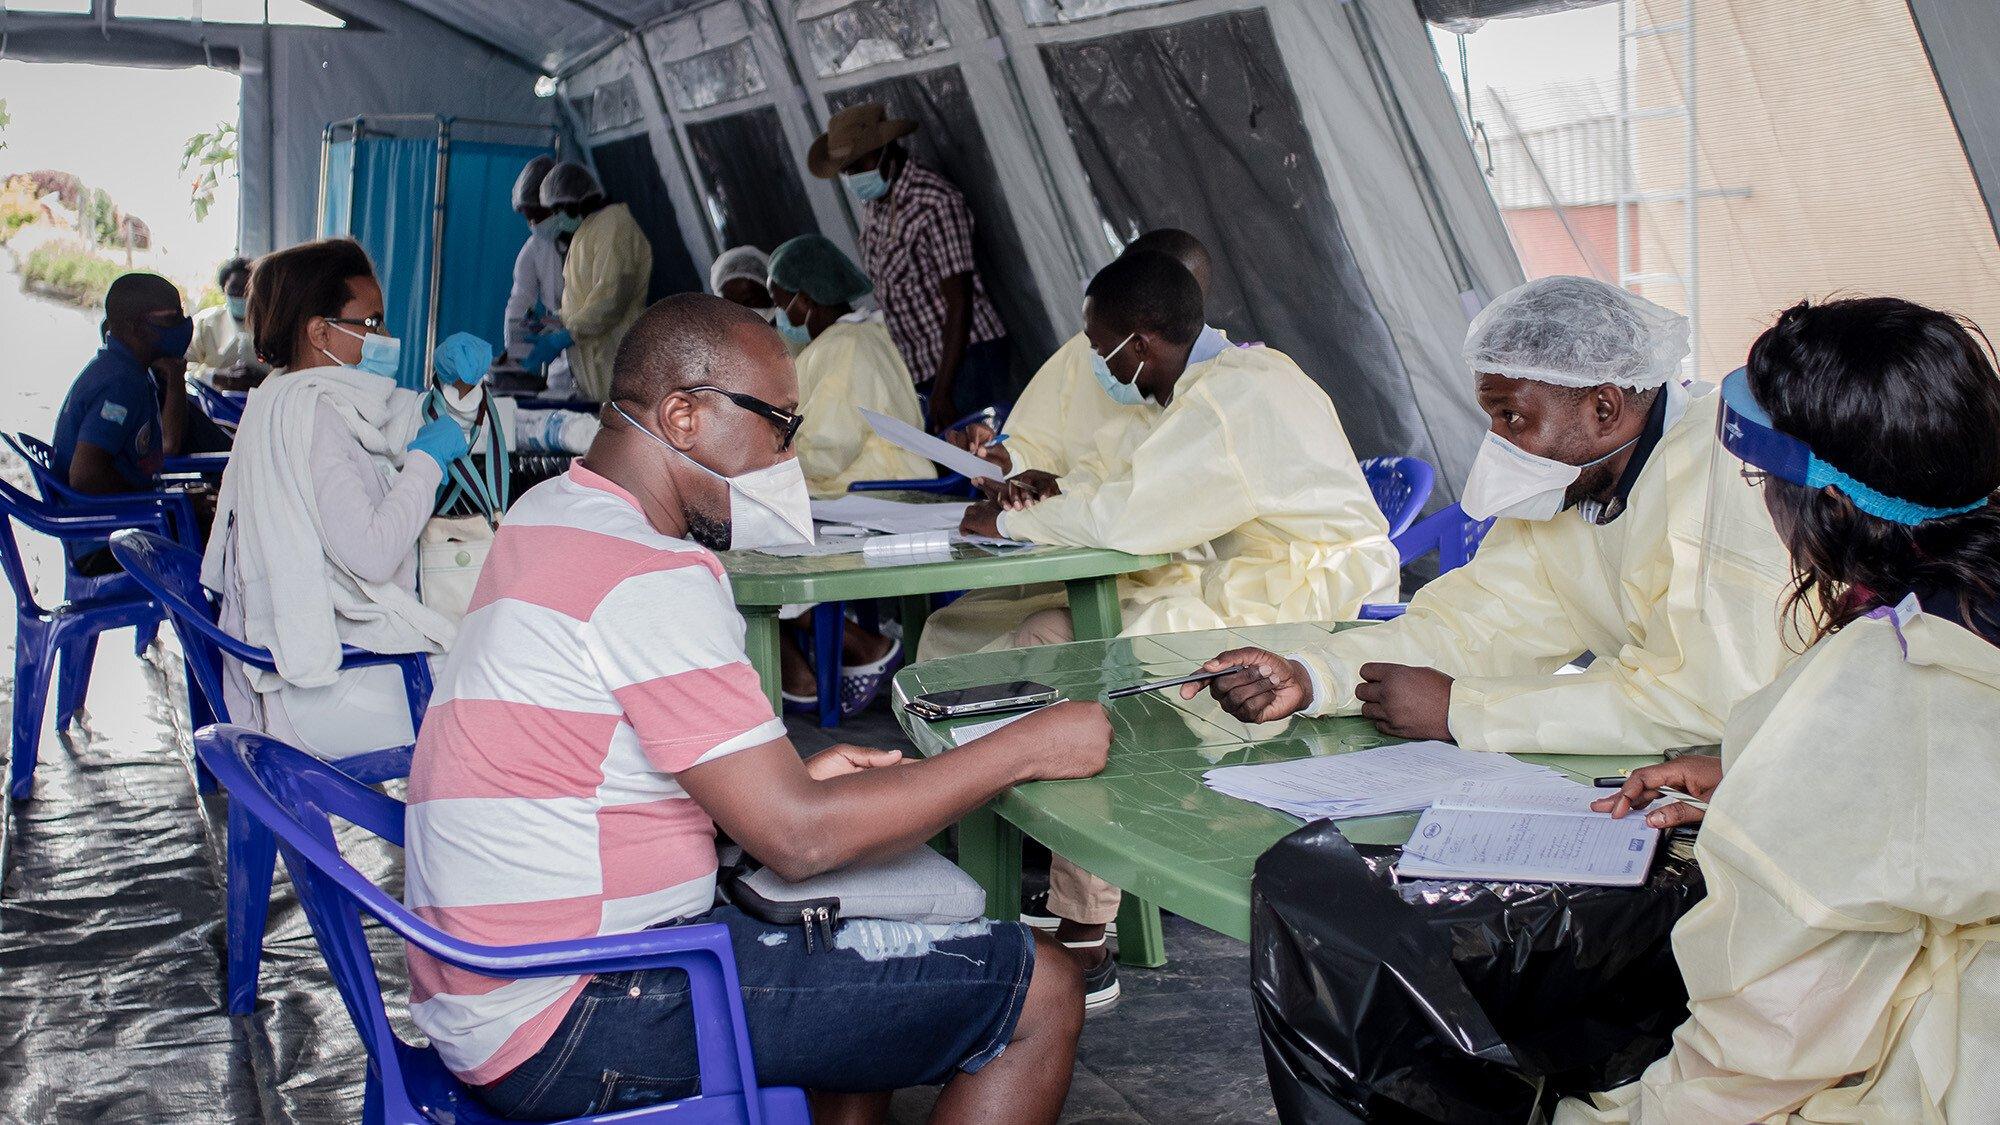 Health workers in the vaccination room during the COVID-19 vaccination campaign on May 5, 2021 in Goma, Democratic Republic of Congo.